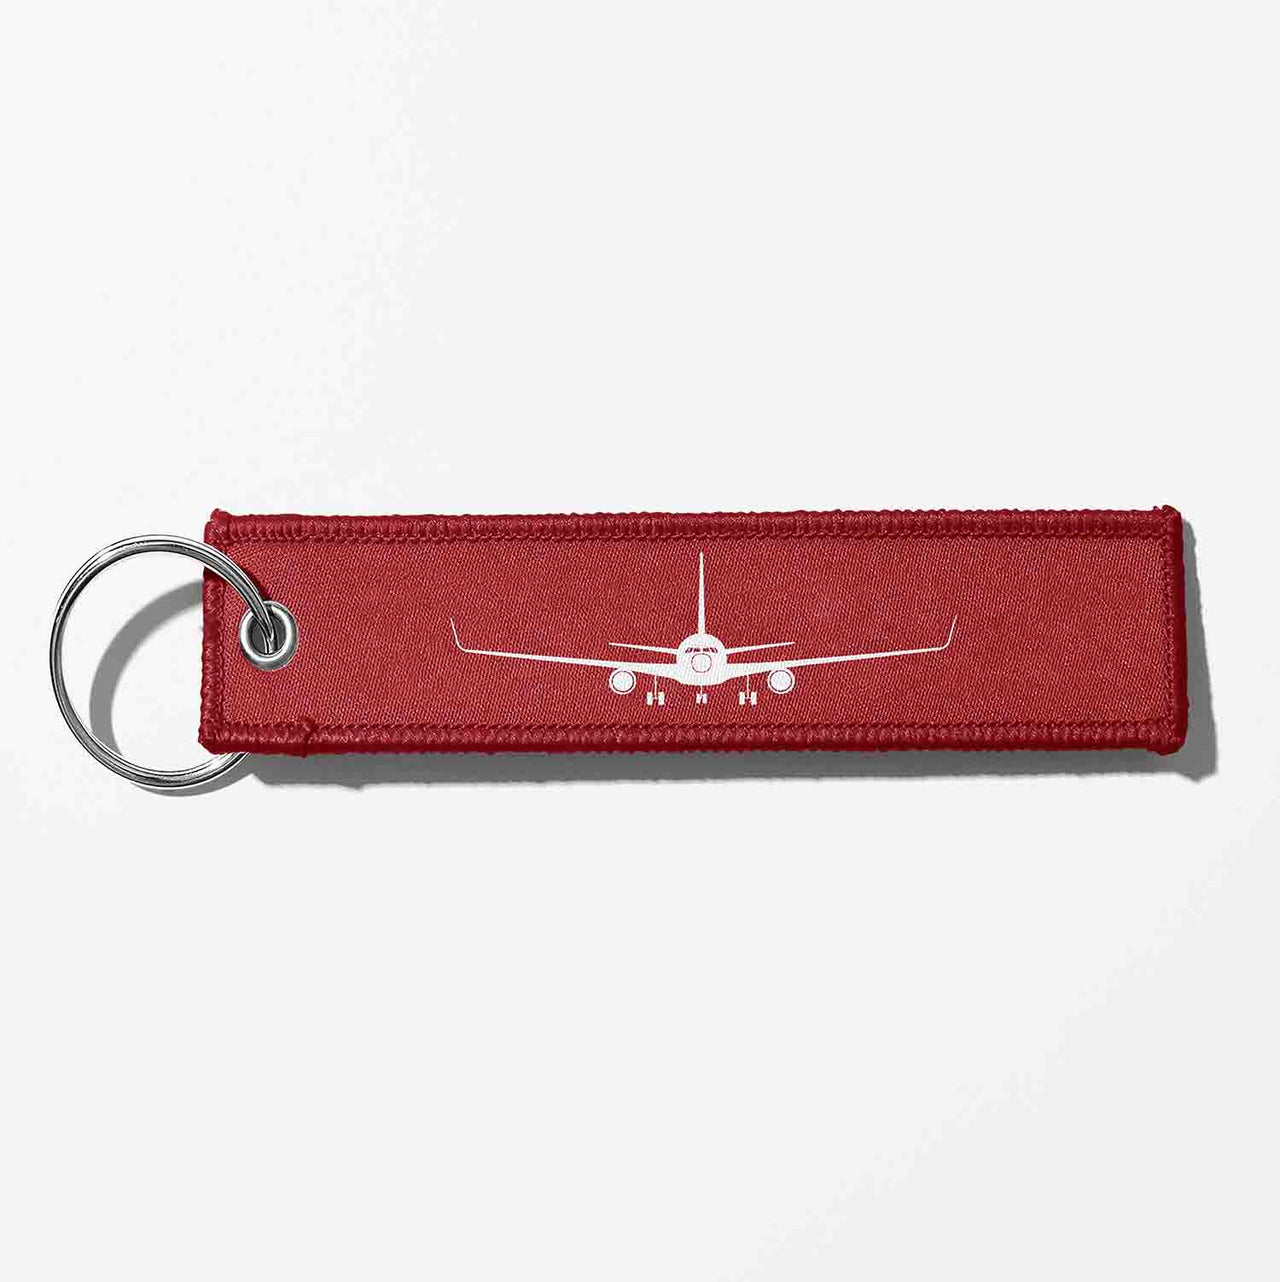 Boeing 767 Silhouette Designed Key Chains